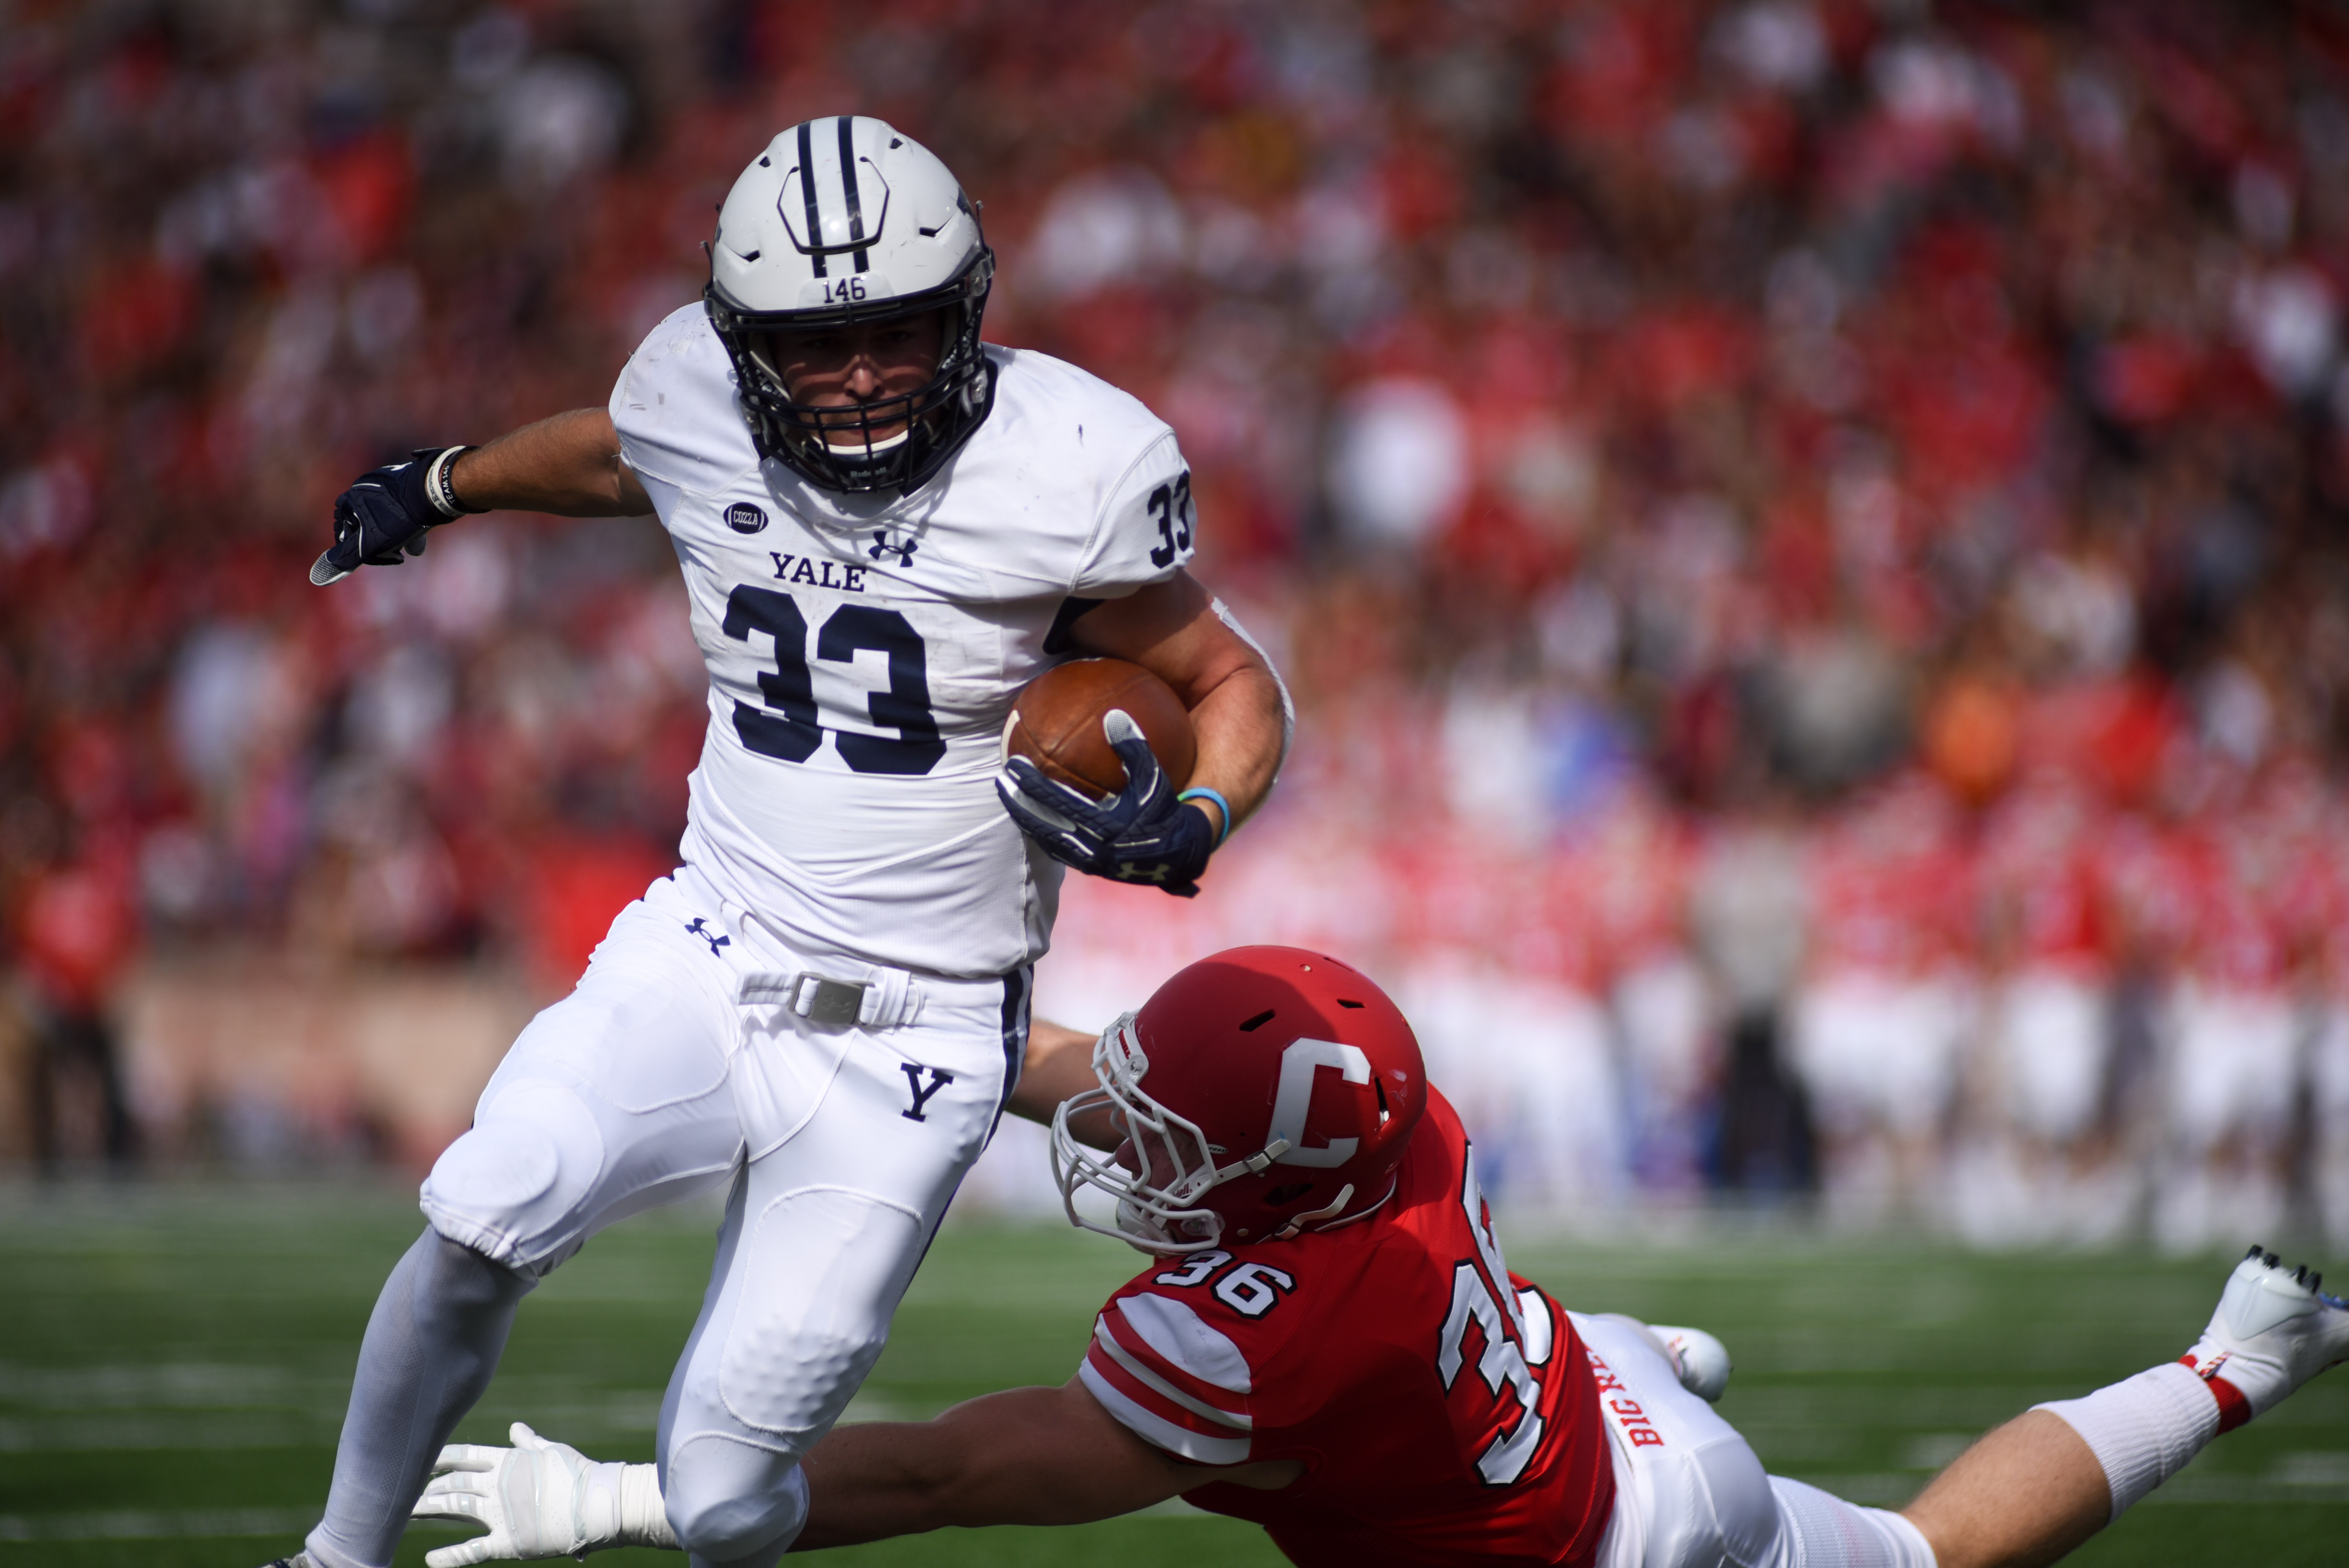 Football Misses Opportunities, Comes Up Short Against Yale on